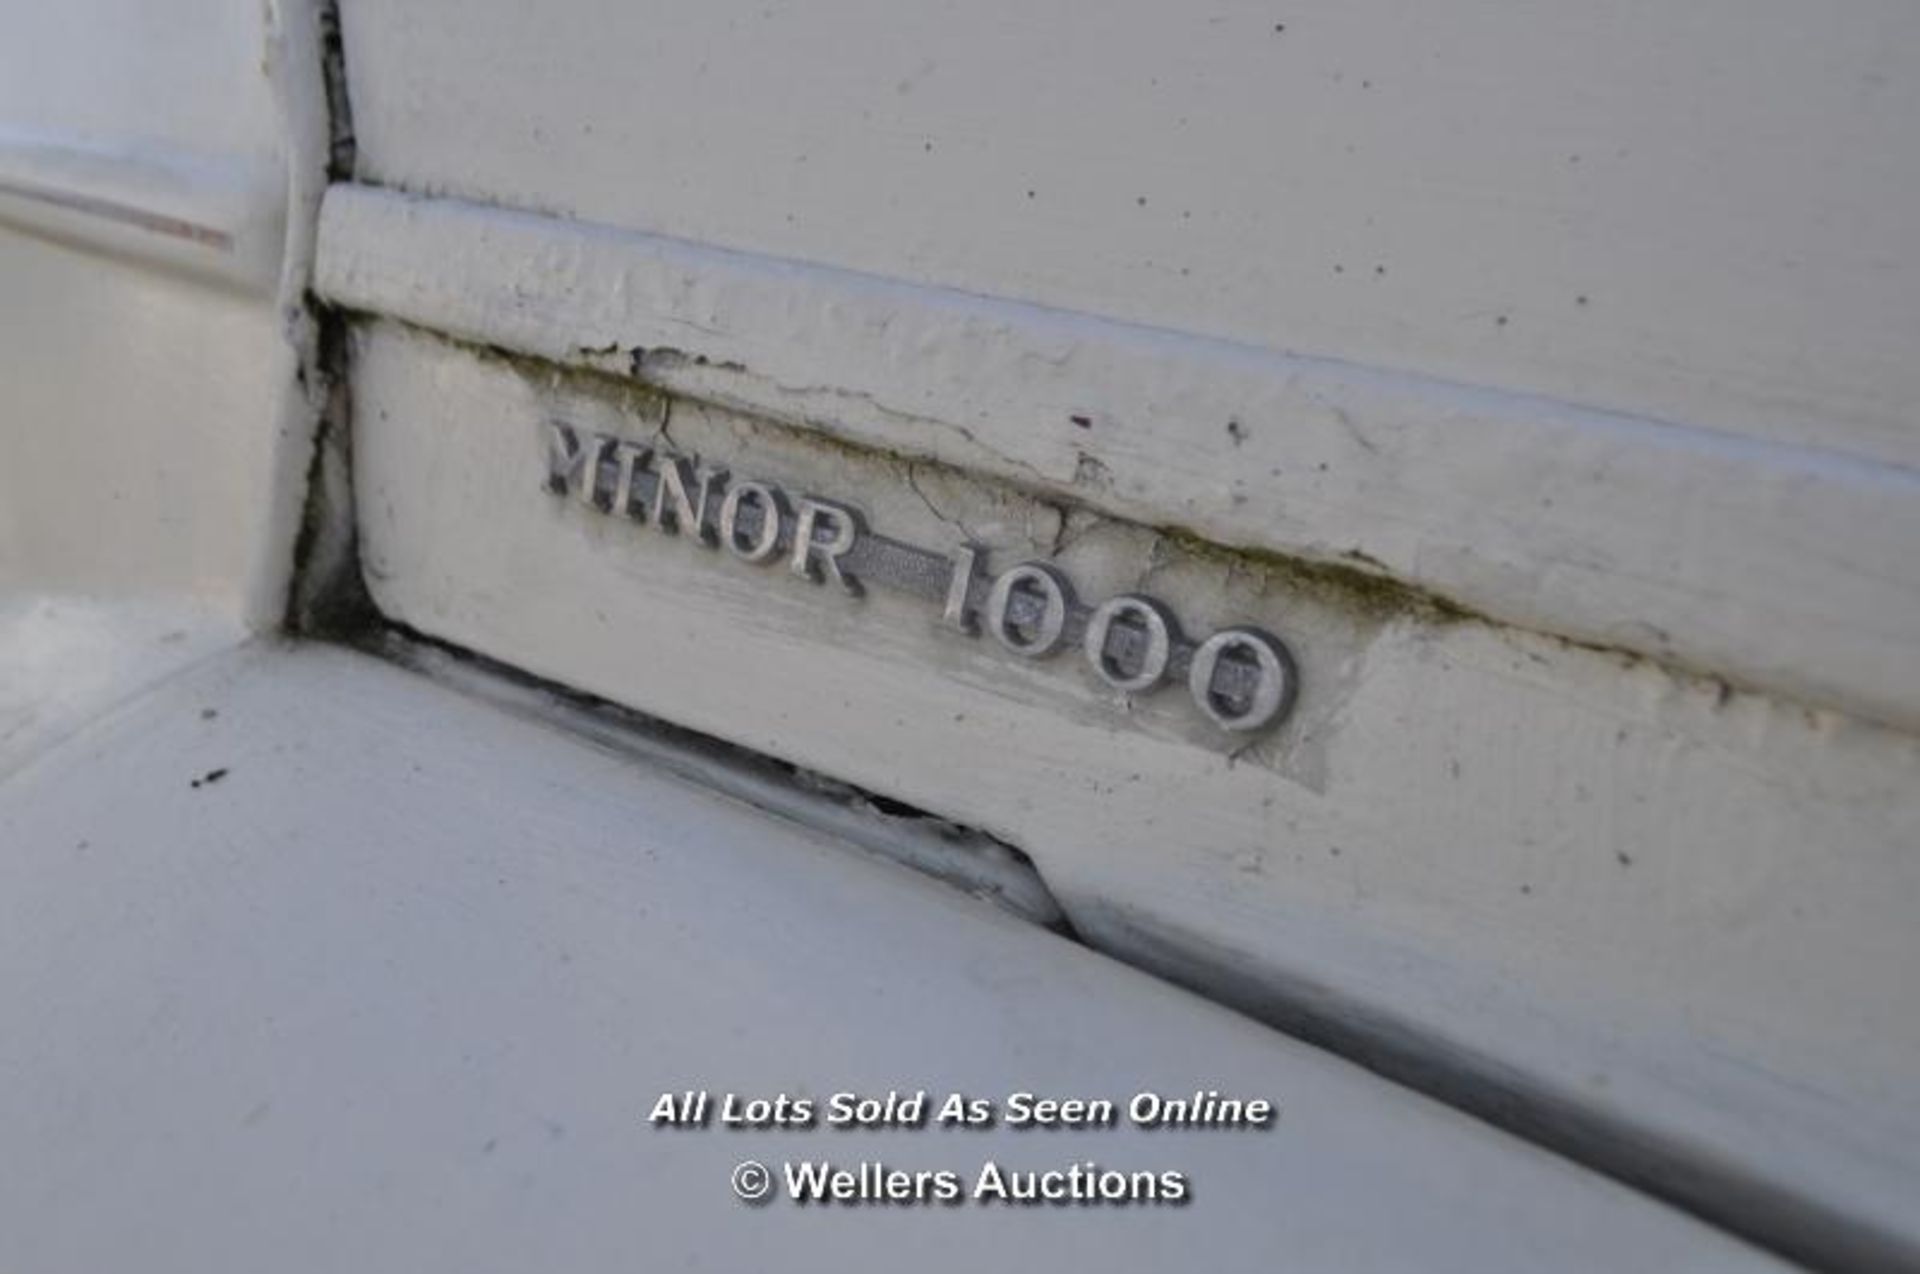 MORRIS MINOR 1000, REG: 16037 (GUERNSEY IMPORT - WILL REQUIRE RE-REGISTRATION IN ENGLAND), - Image 8 of 9